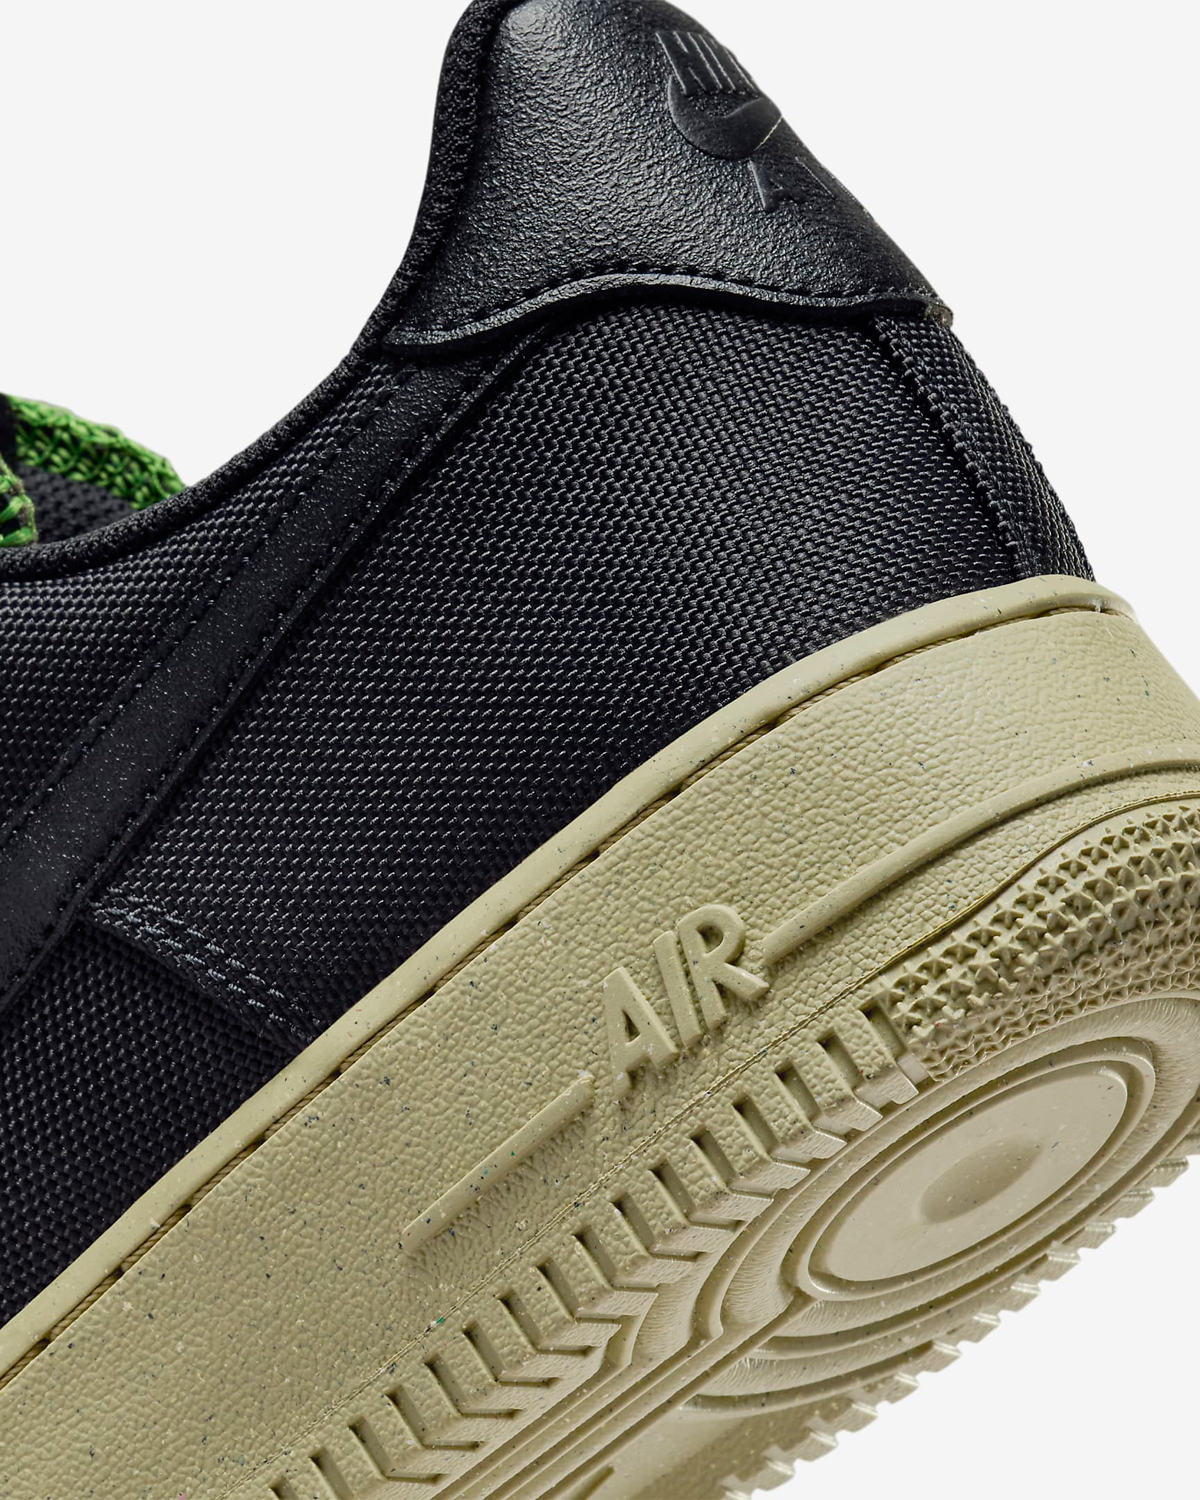 Nike-Air-Force-1-Low-Canvas-Black-Neutral-Olive-Chlorophyll-Release-Date-8